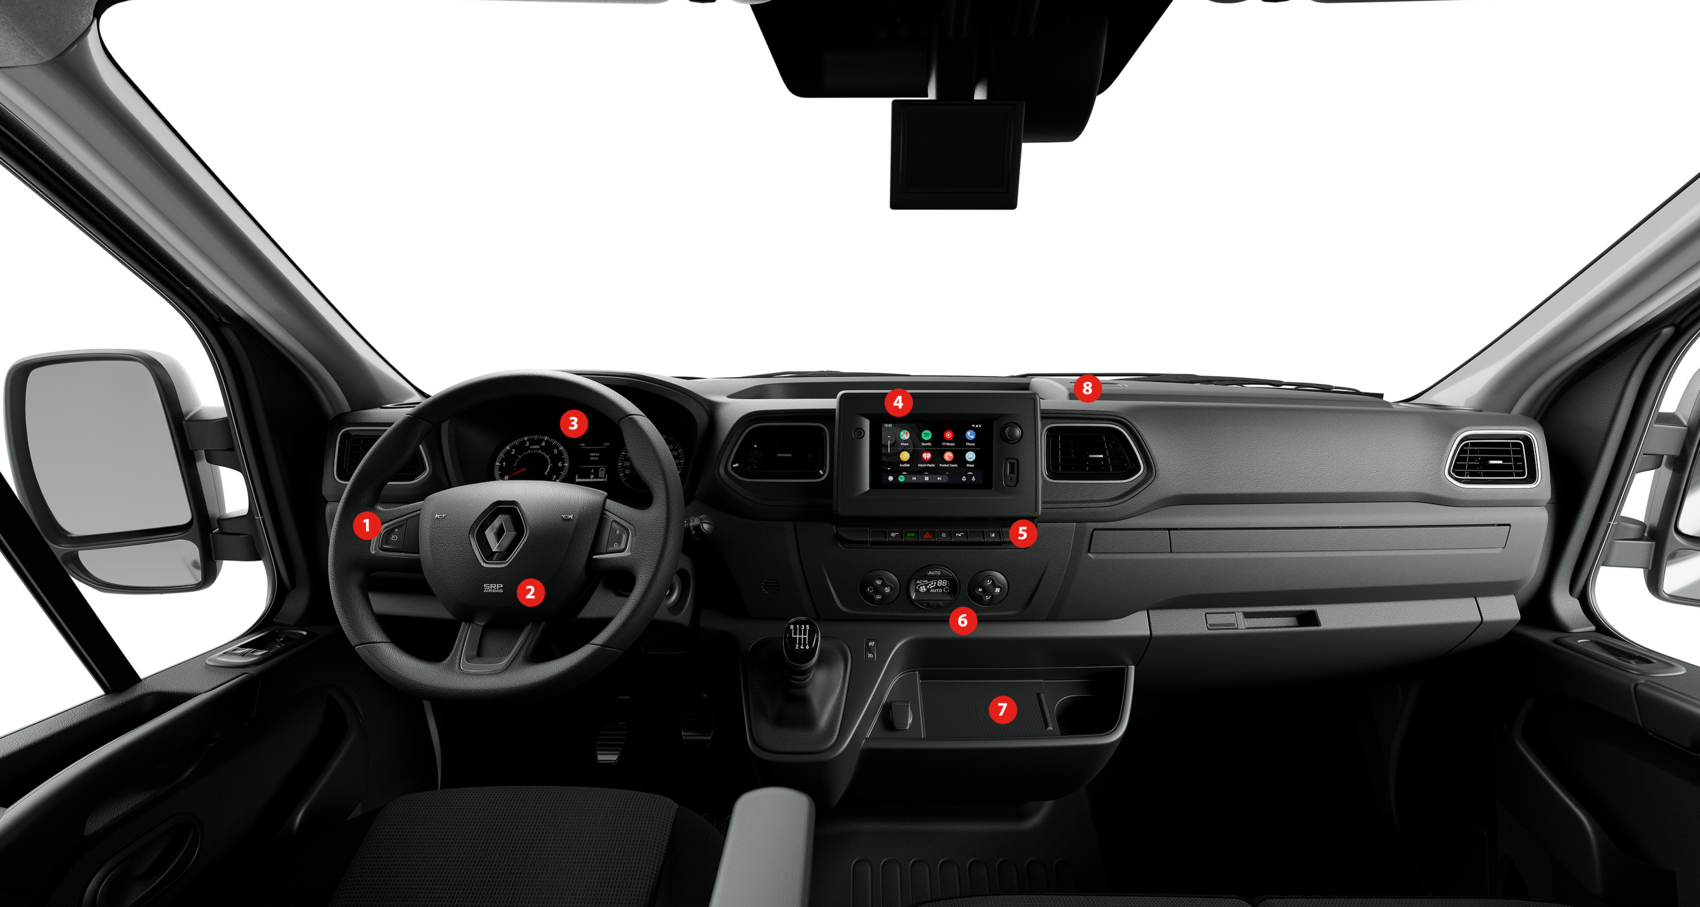 Renault Master dashboard interieur features